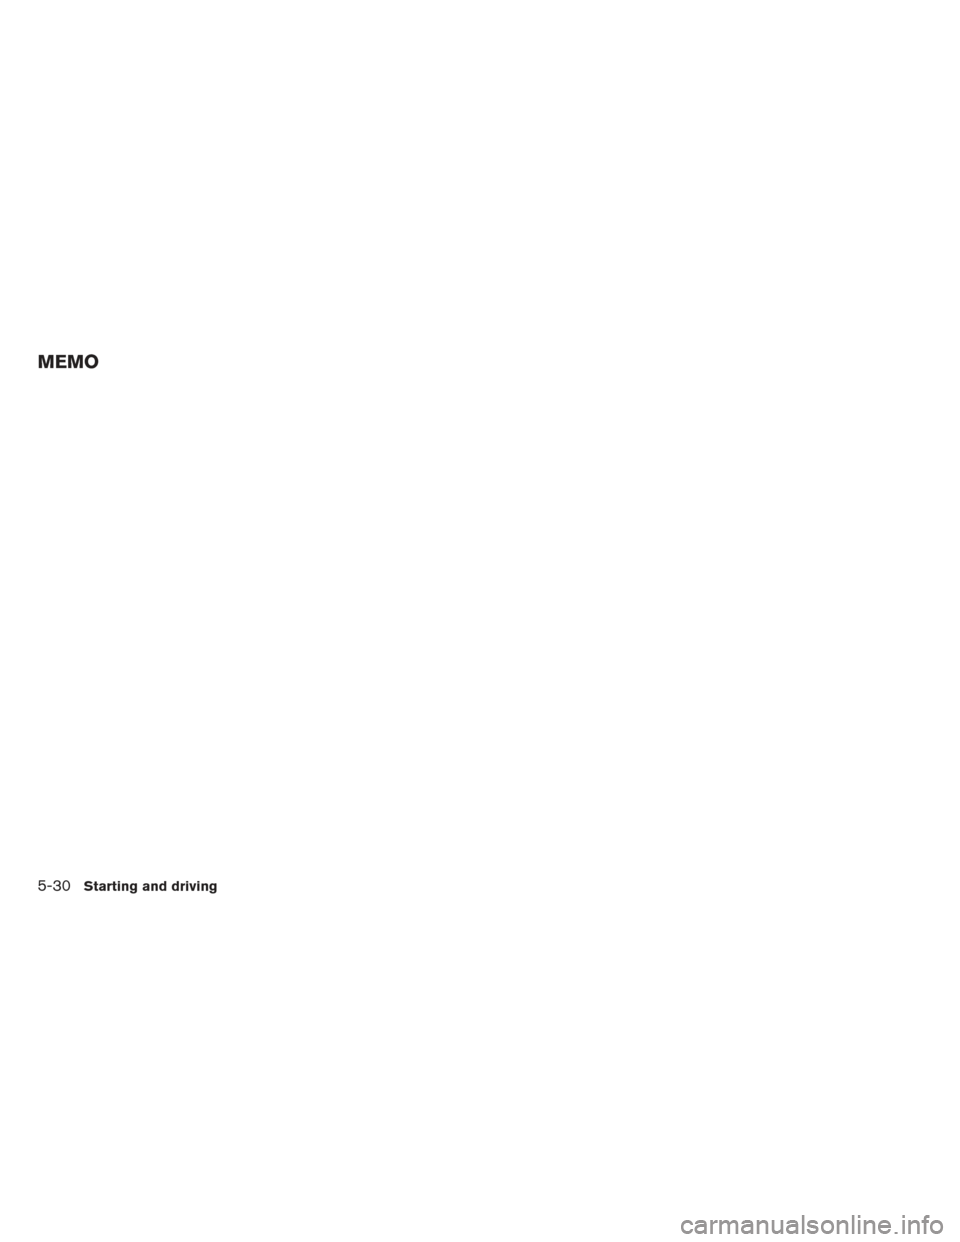 NISSAN MAXIMA 2013 A35 / 7.G Owners Manual MEMO
5-30Starting and driving 